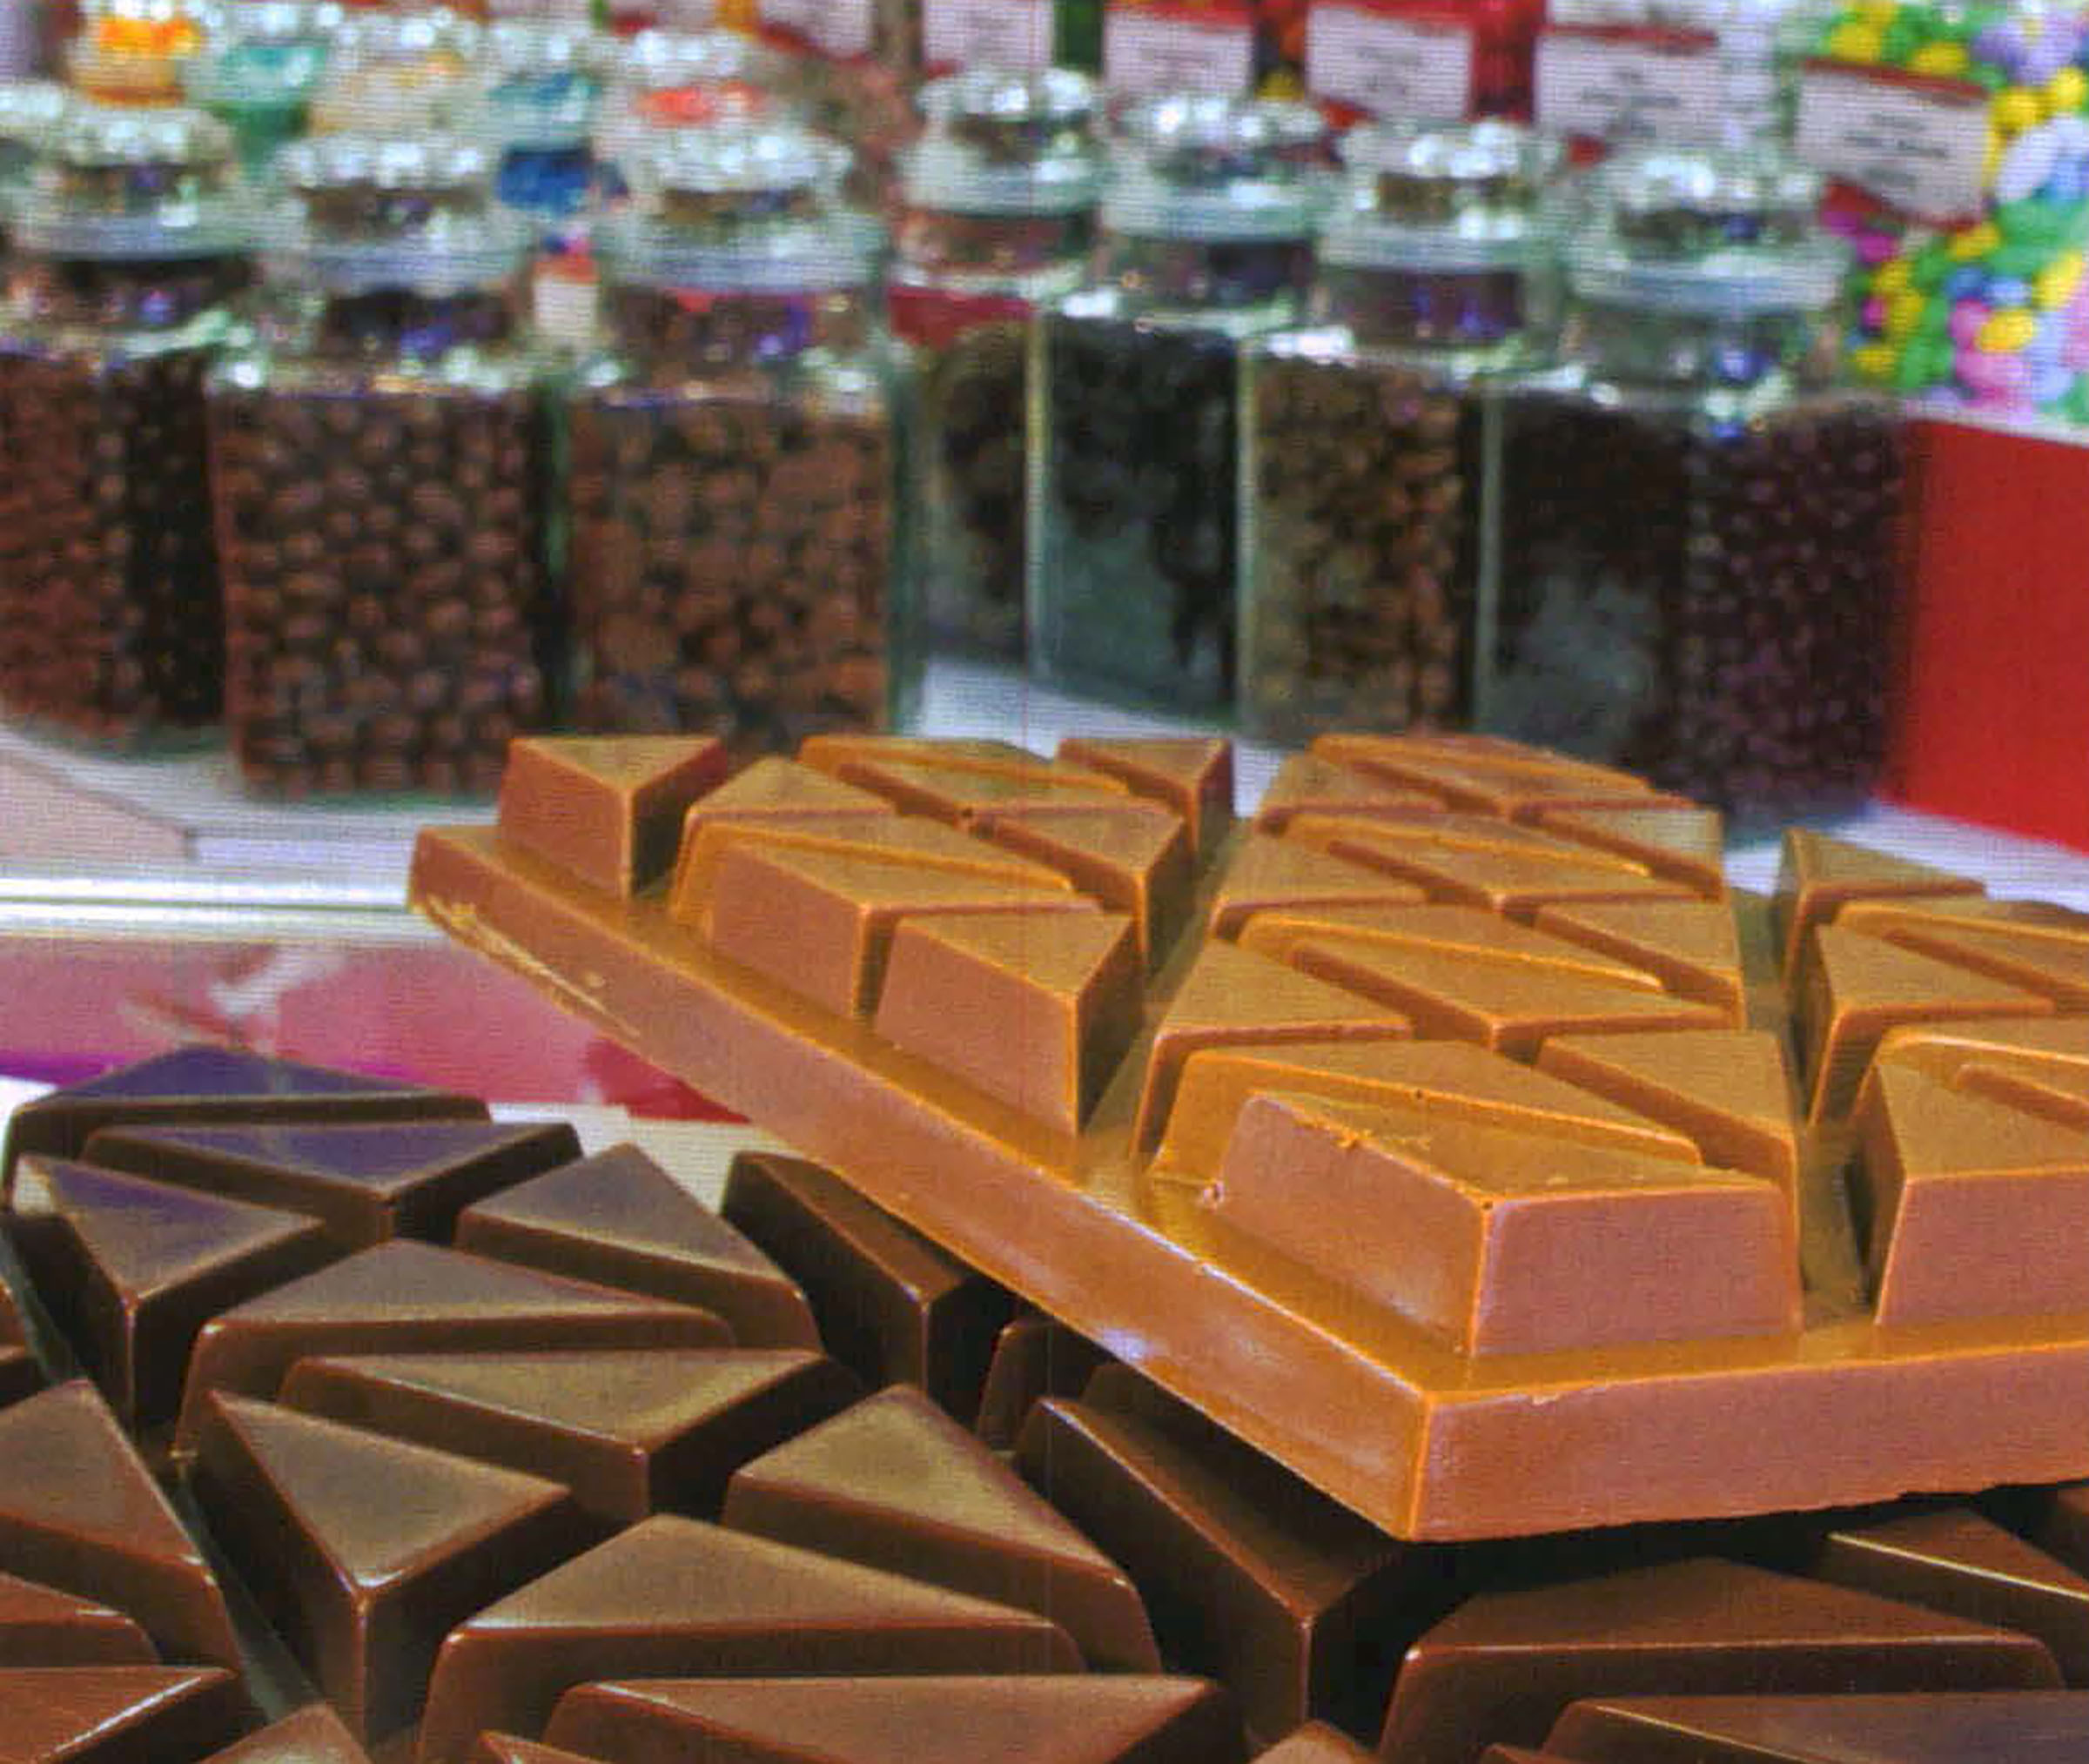 Close-up photo of two chocolate bars